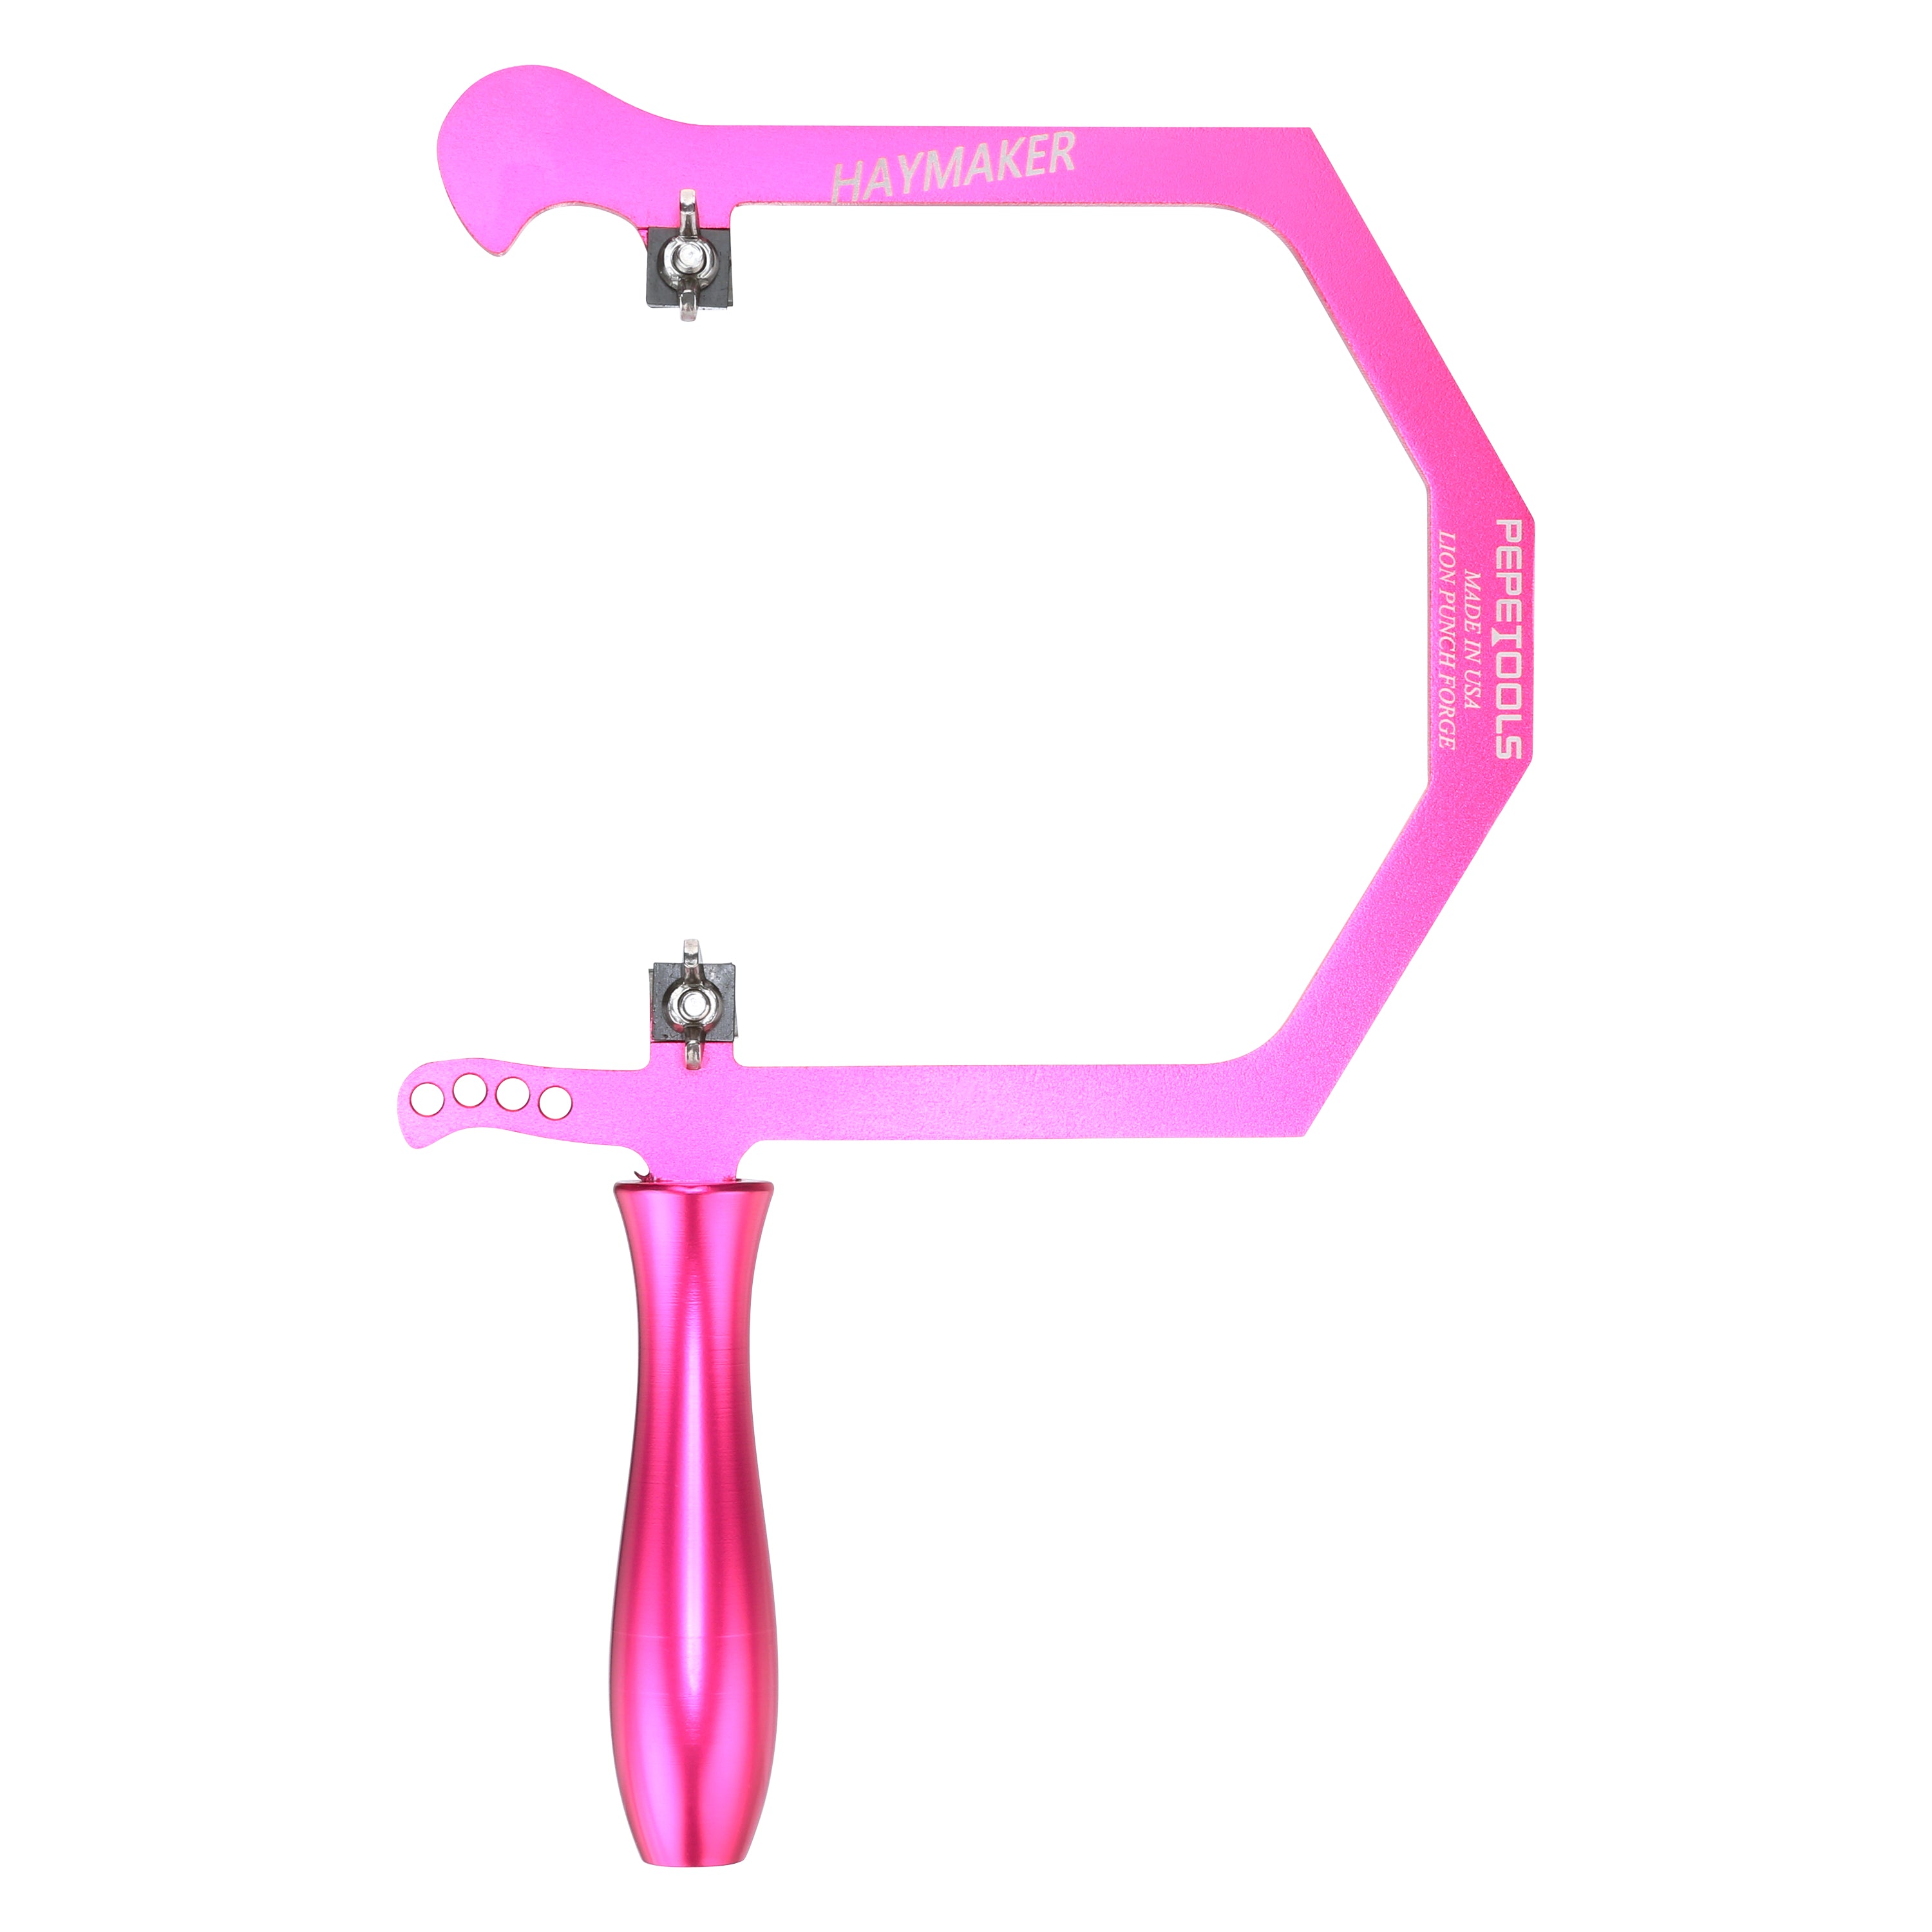 Haymaker Saw in Bright Pink, Special Edition